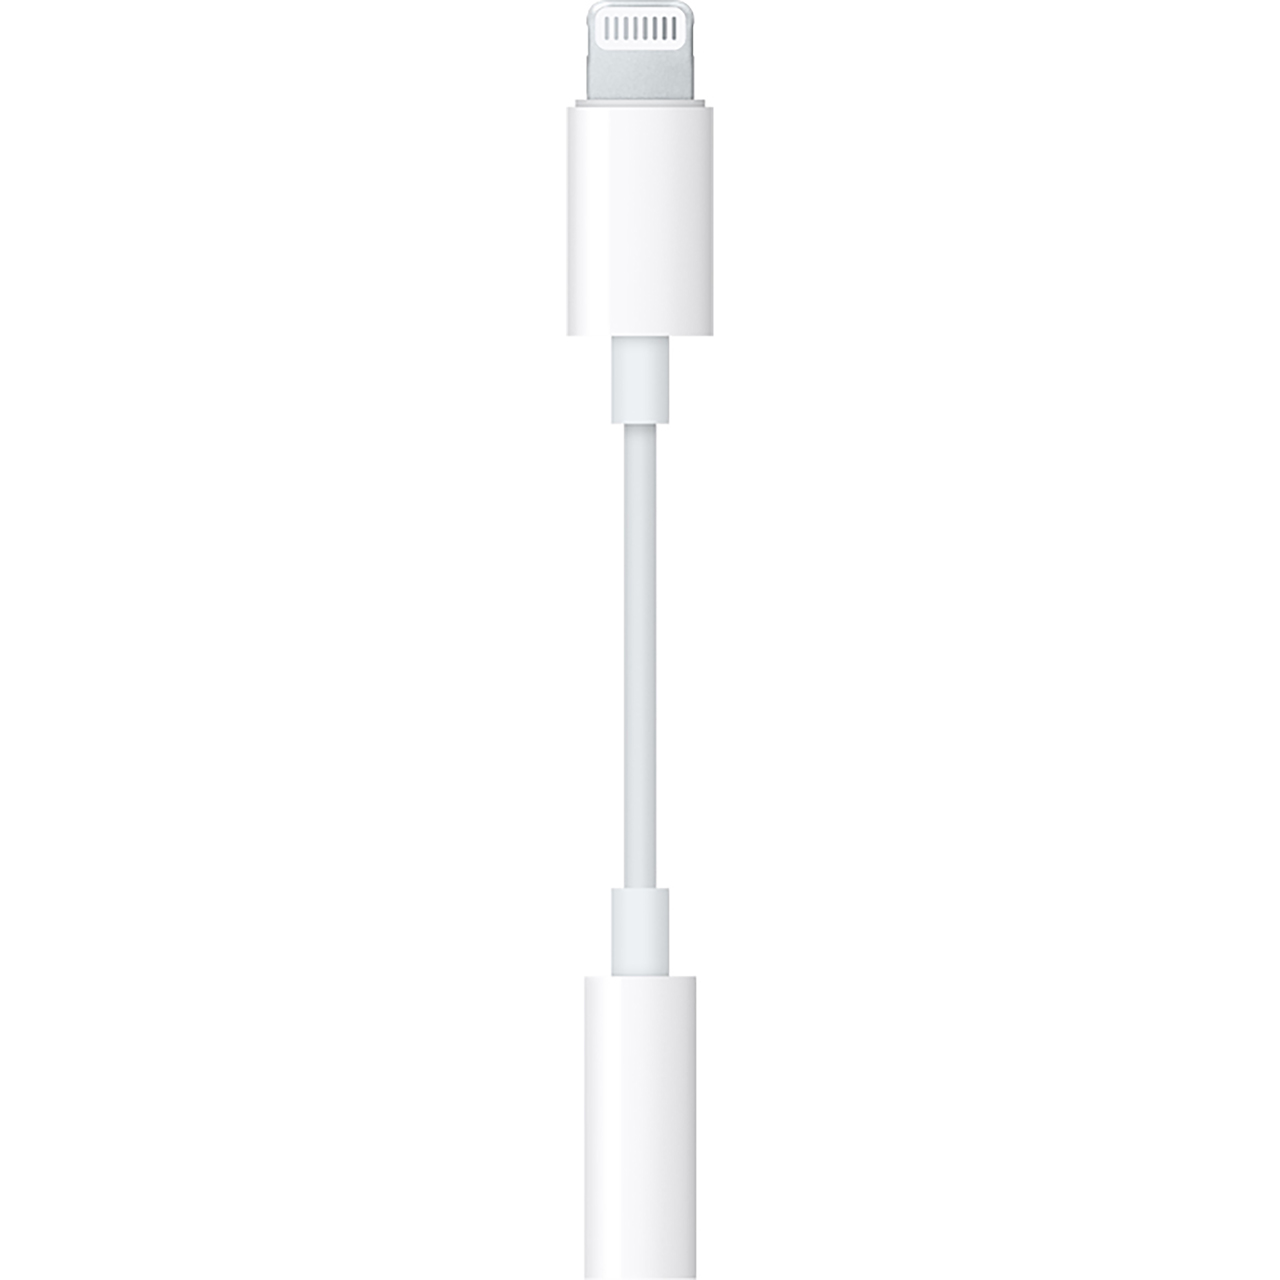 Apple MMX62ZM/A 0.045m Lightning to 3.5 mm Headphone Jack Adapter Cable Review